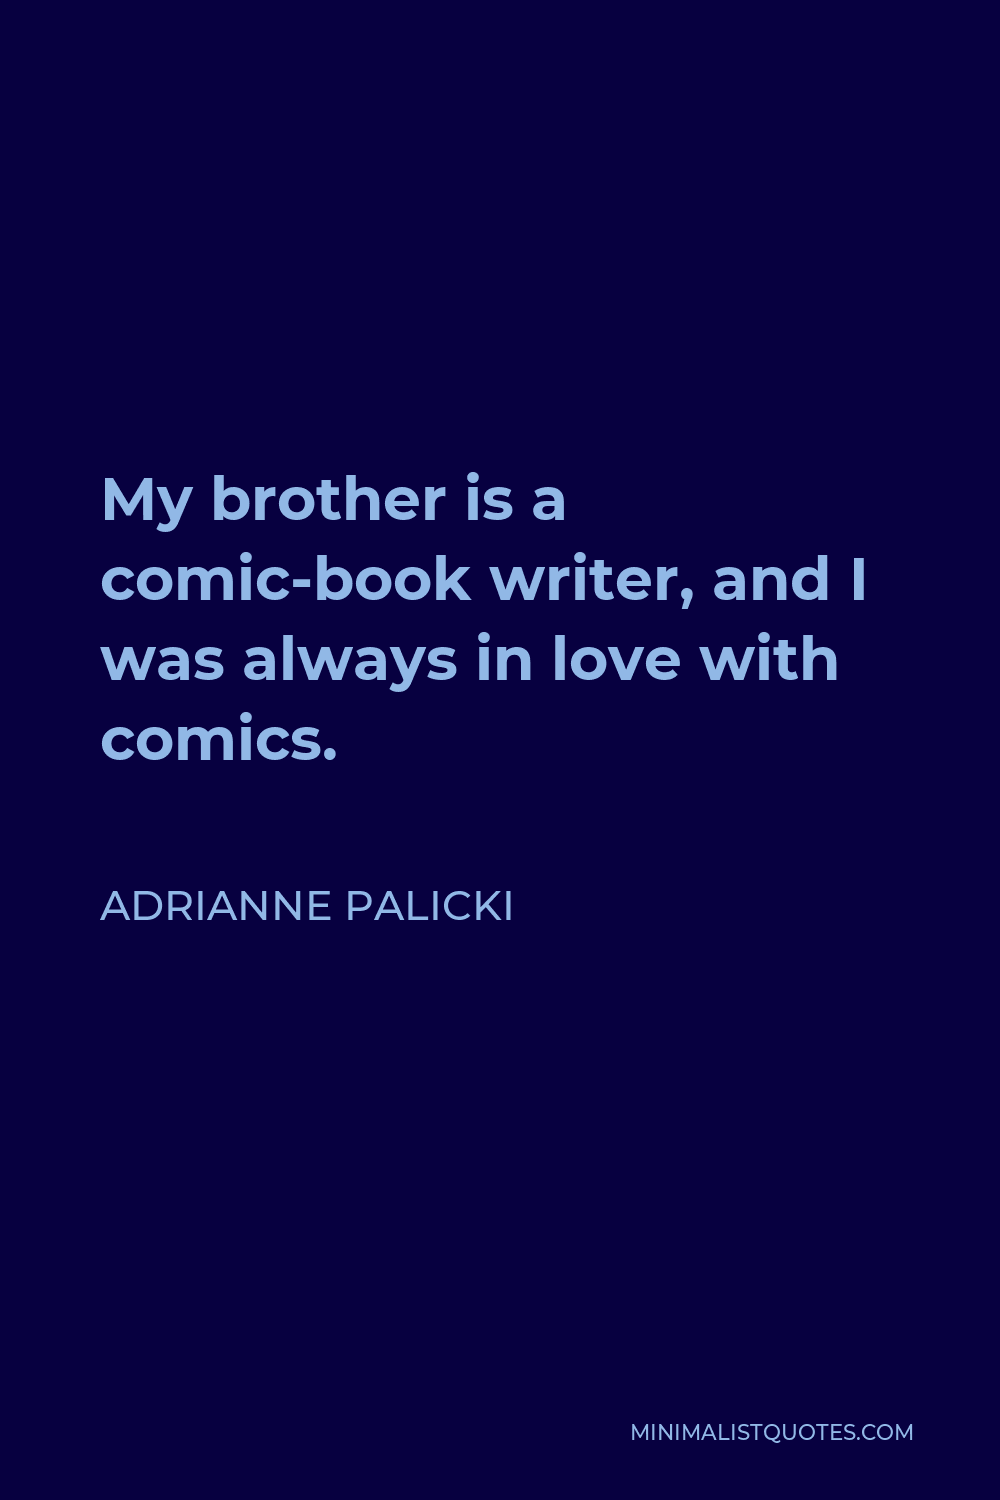 Adrianne Palicki Quote - My brother is a comic-book writer, and I was always in love with comics.